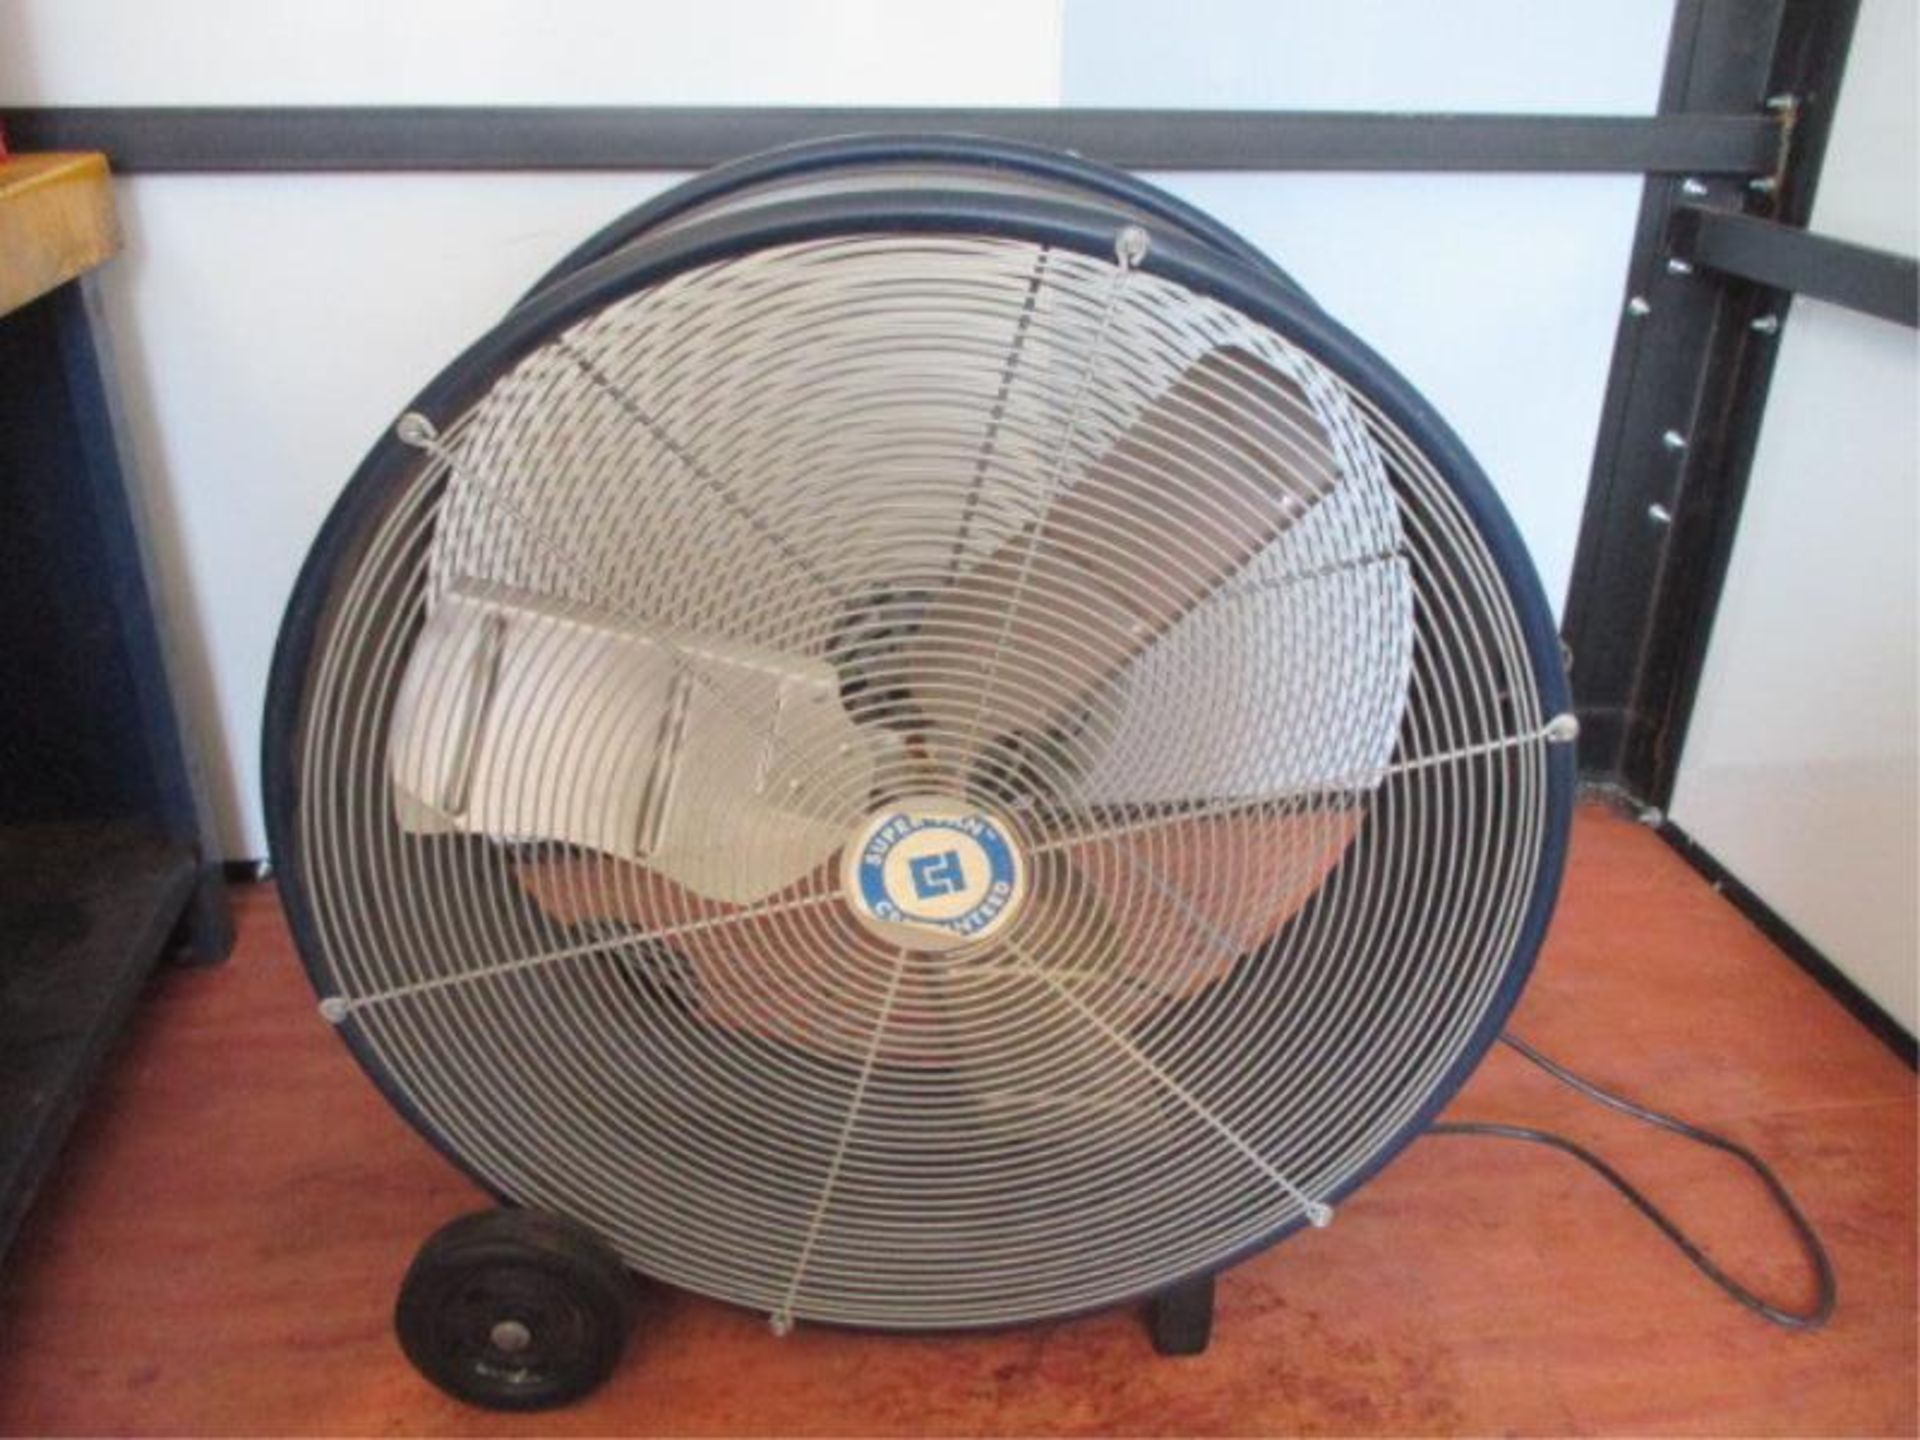 28" Mobile Air Circulator, By CertainTeed Ventilation, Model: SF28, 115 Volts, 60 HZ, 4.0 Amp